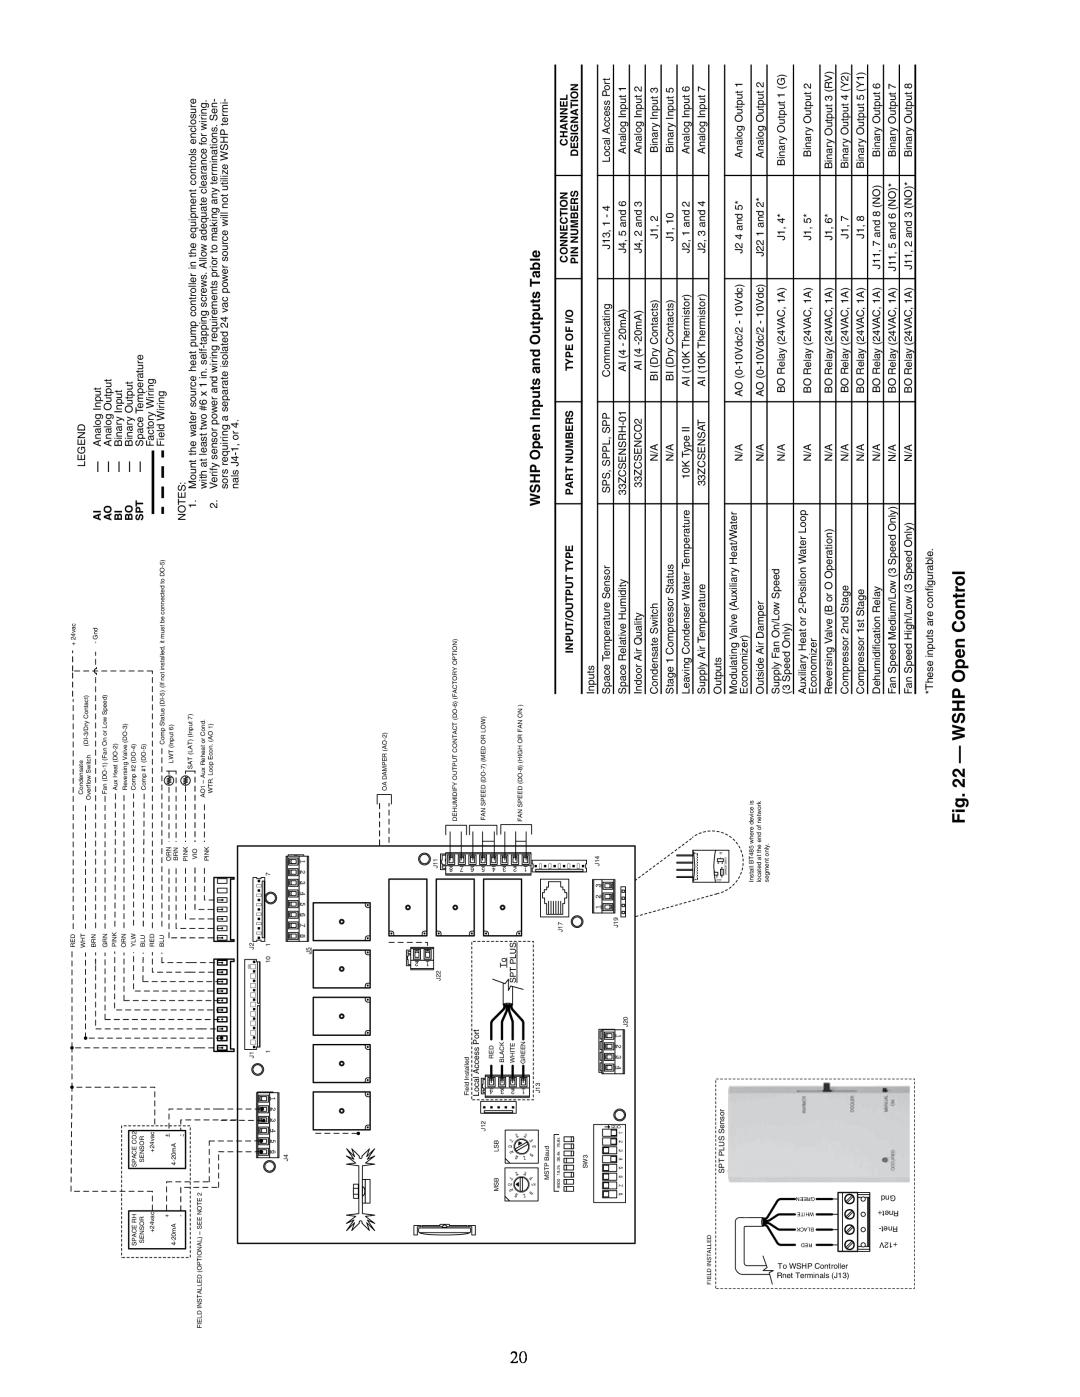 Carrier PCV015-060 specifications WSHP Open Control, WSHP Open Inputs and Outputs Table 